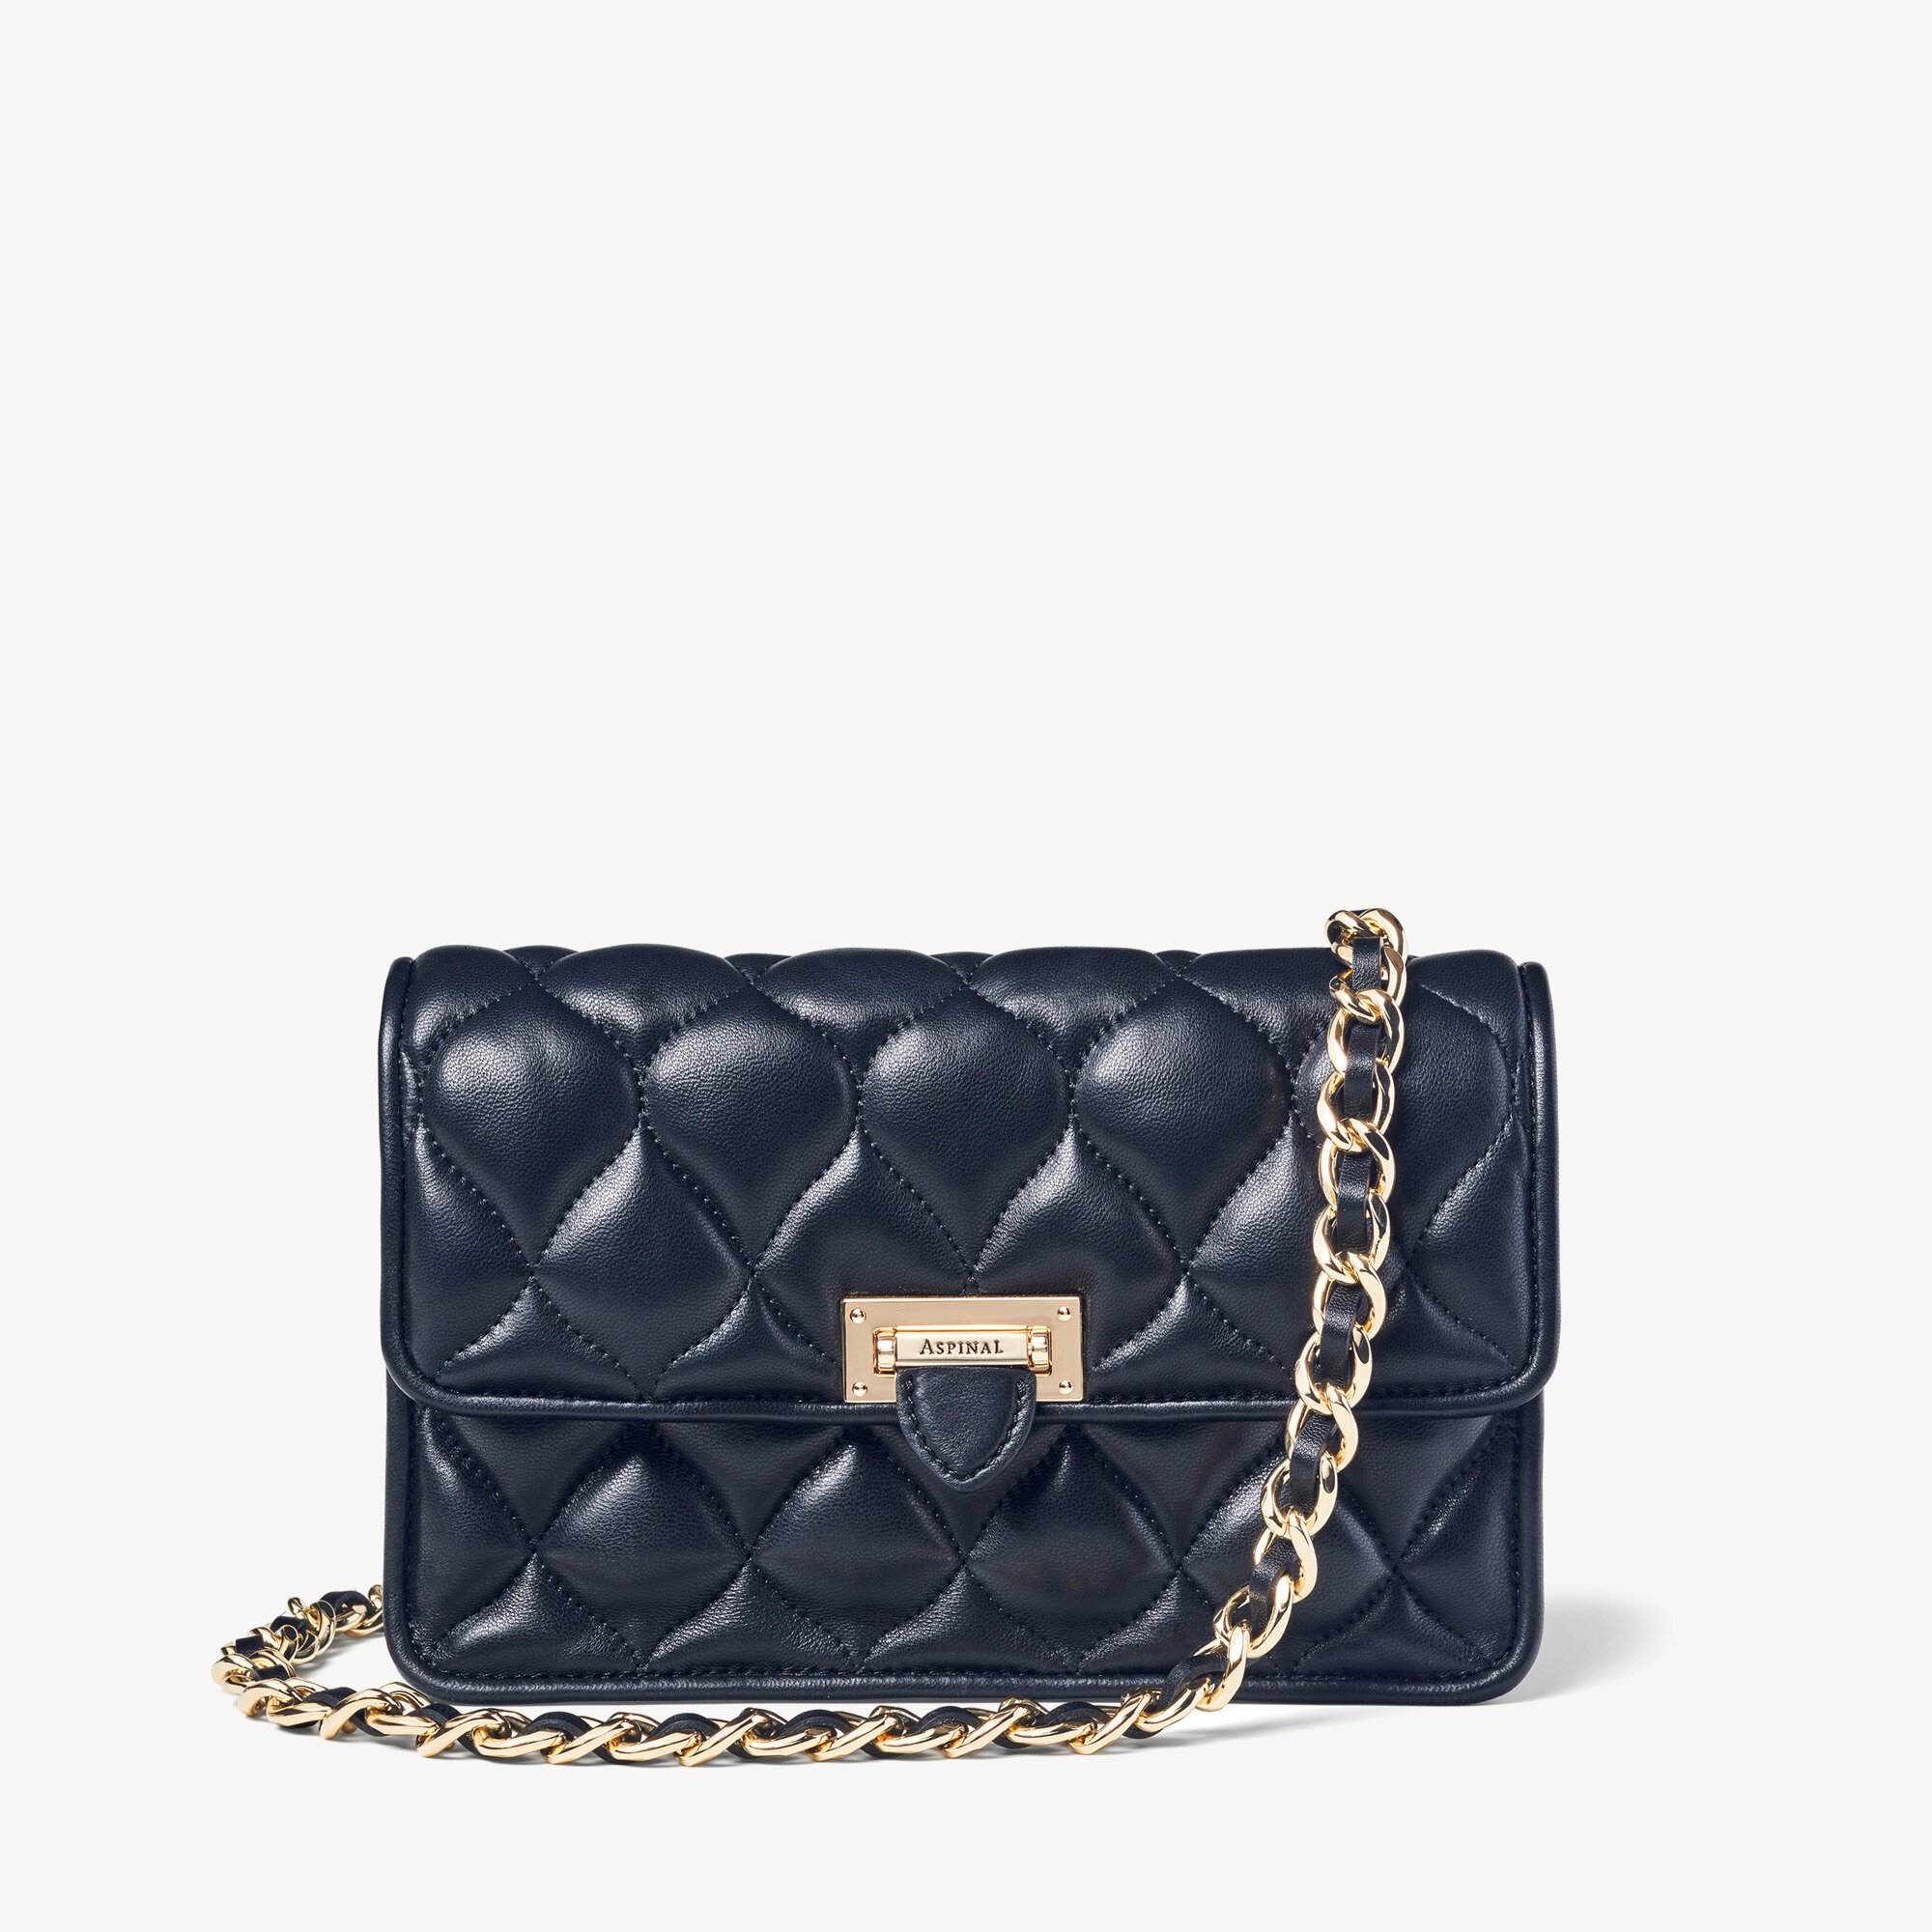 Aspinal of London Lottie Pillow Clutch in Navy Quilted Lambskin.jpg